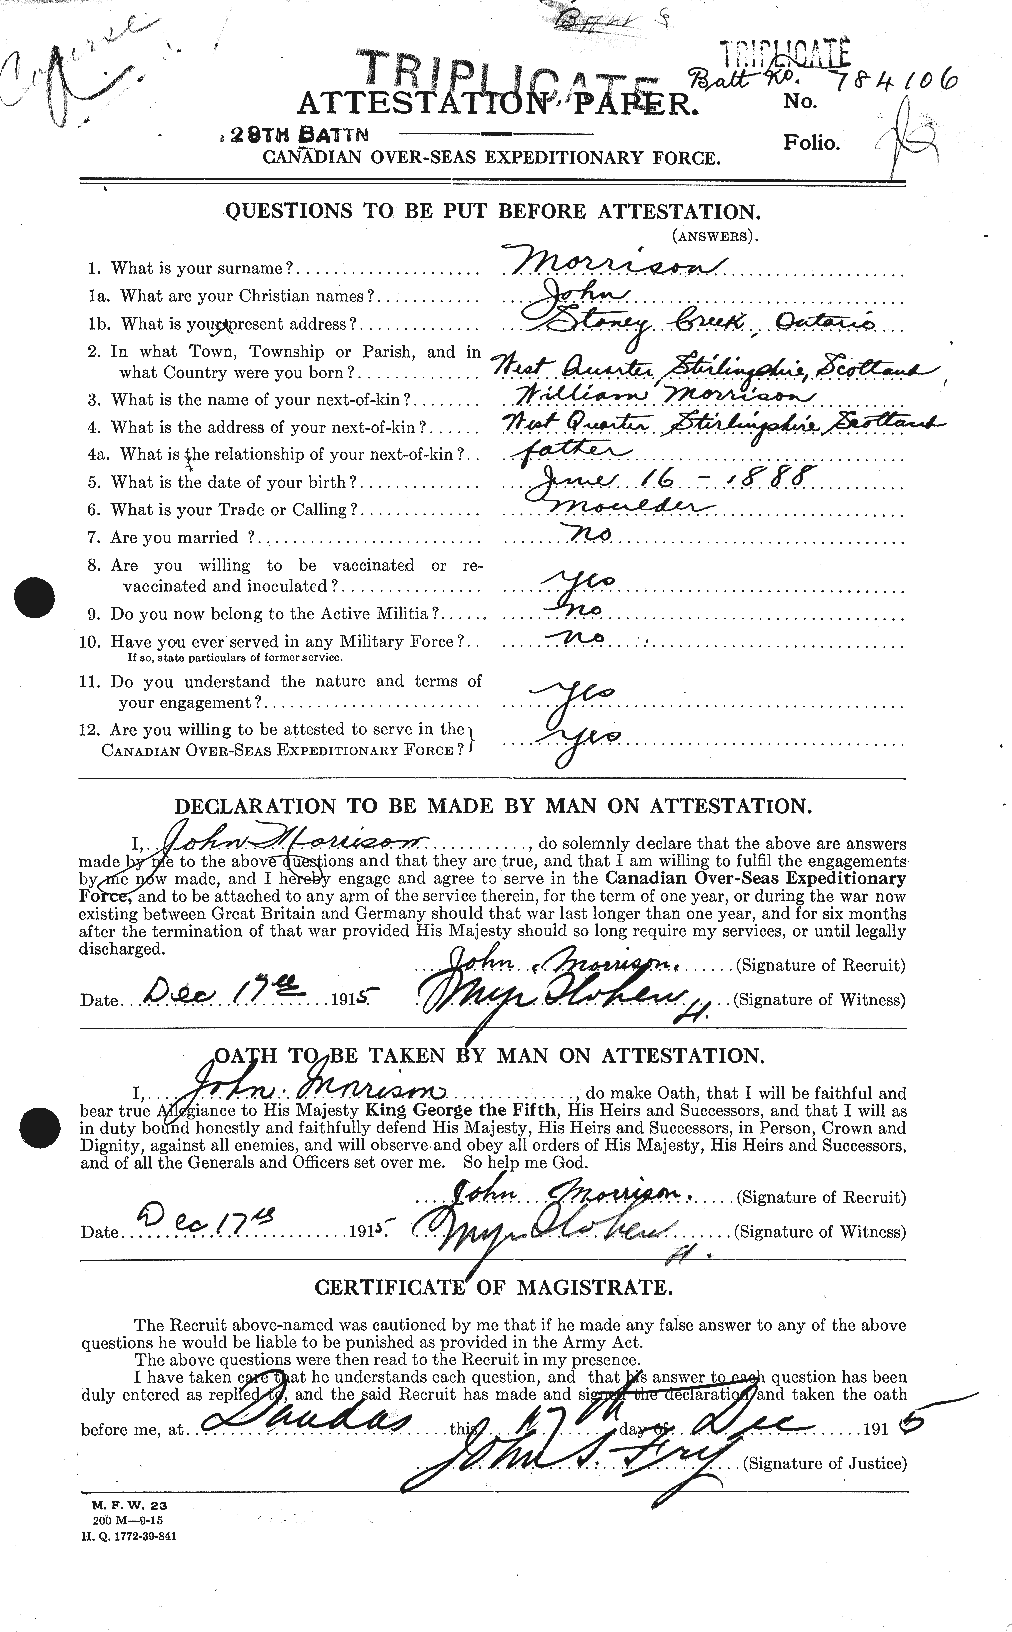 Personnel Records of the First World War - CEF 506989a